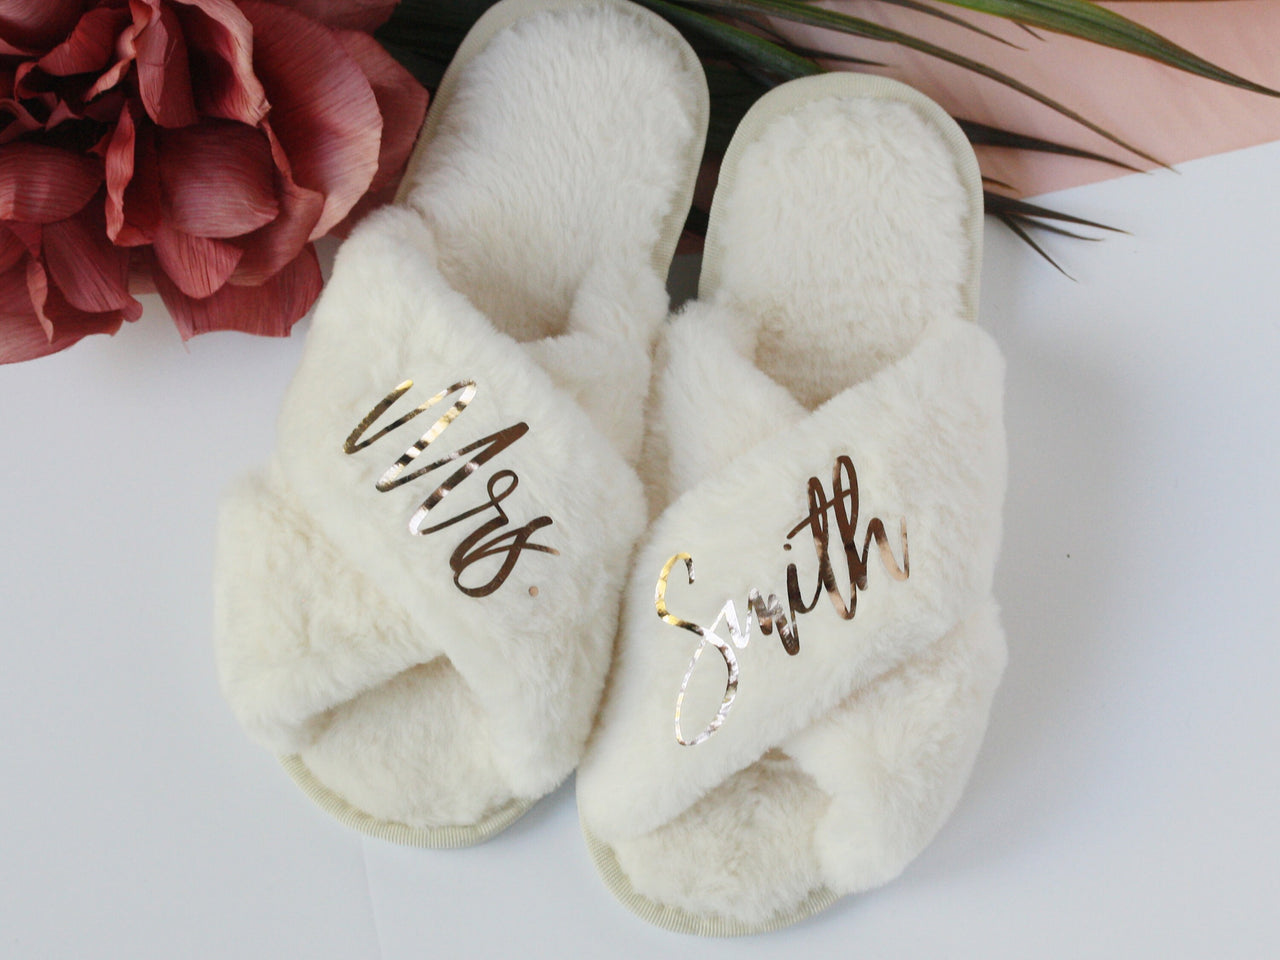 Bride Slippers, Bridesmaid slippers, Bridal slippers, custom slippers, fluffy slippers, Wedding slipper set, bridesmaid gifts, personalized